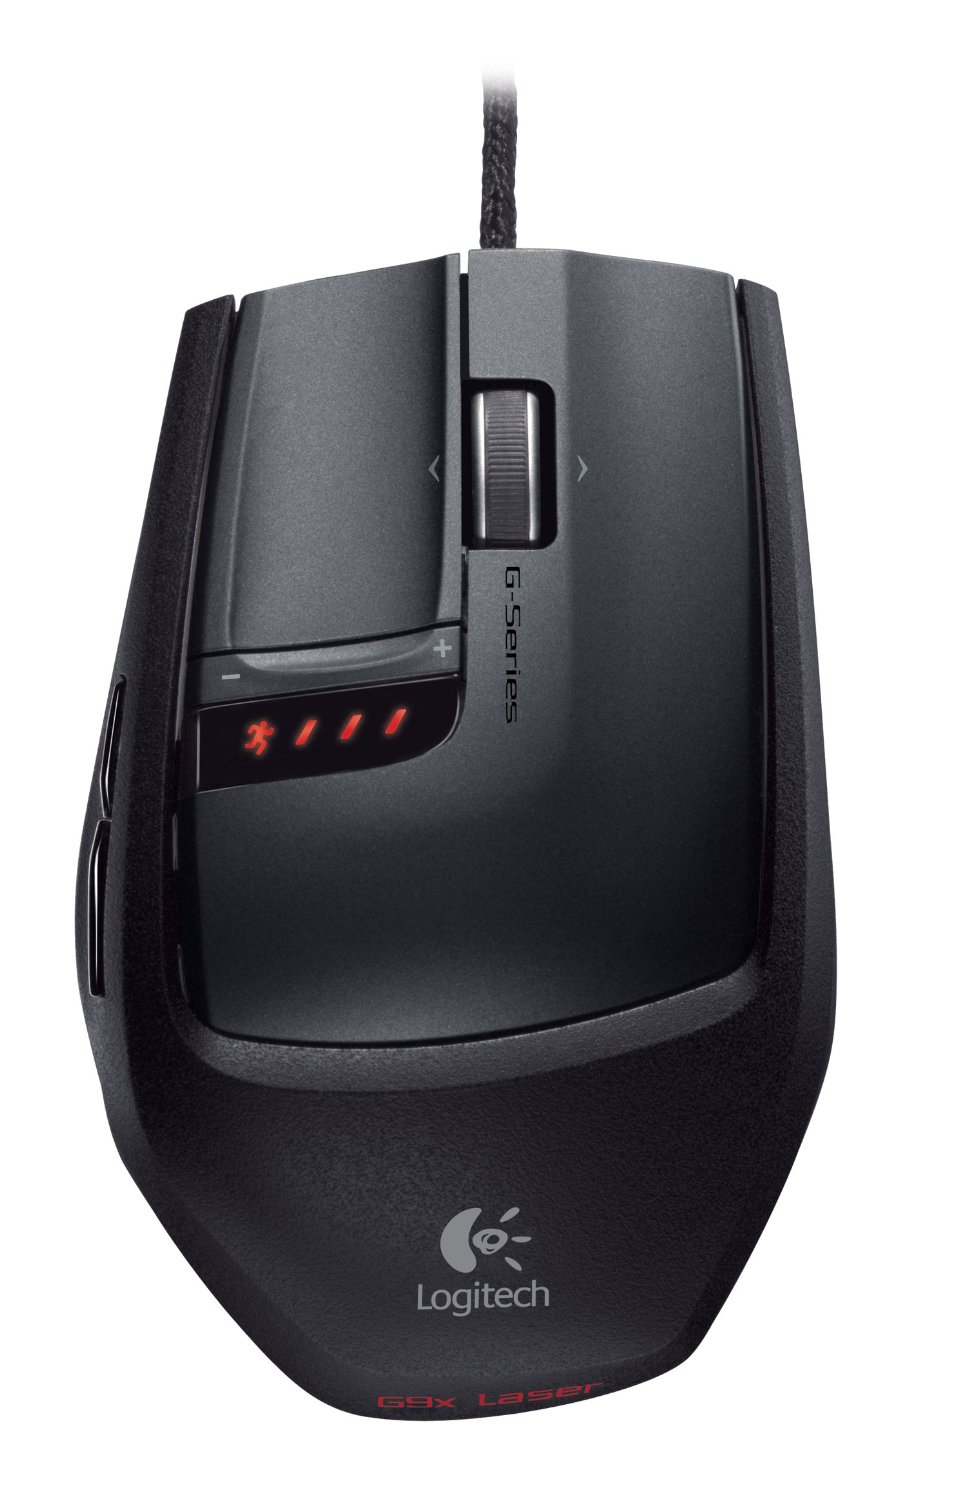 G9X MOUSE DRIVER FOR PC